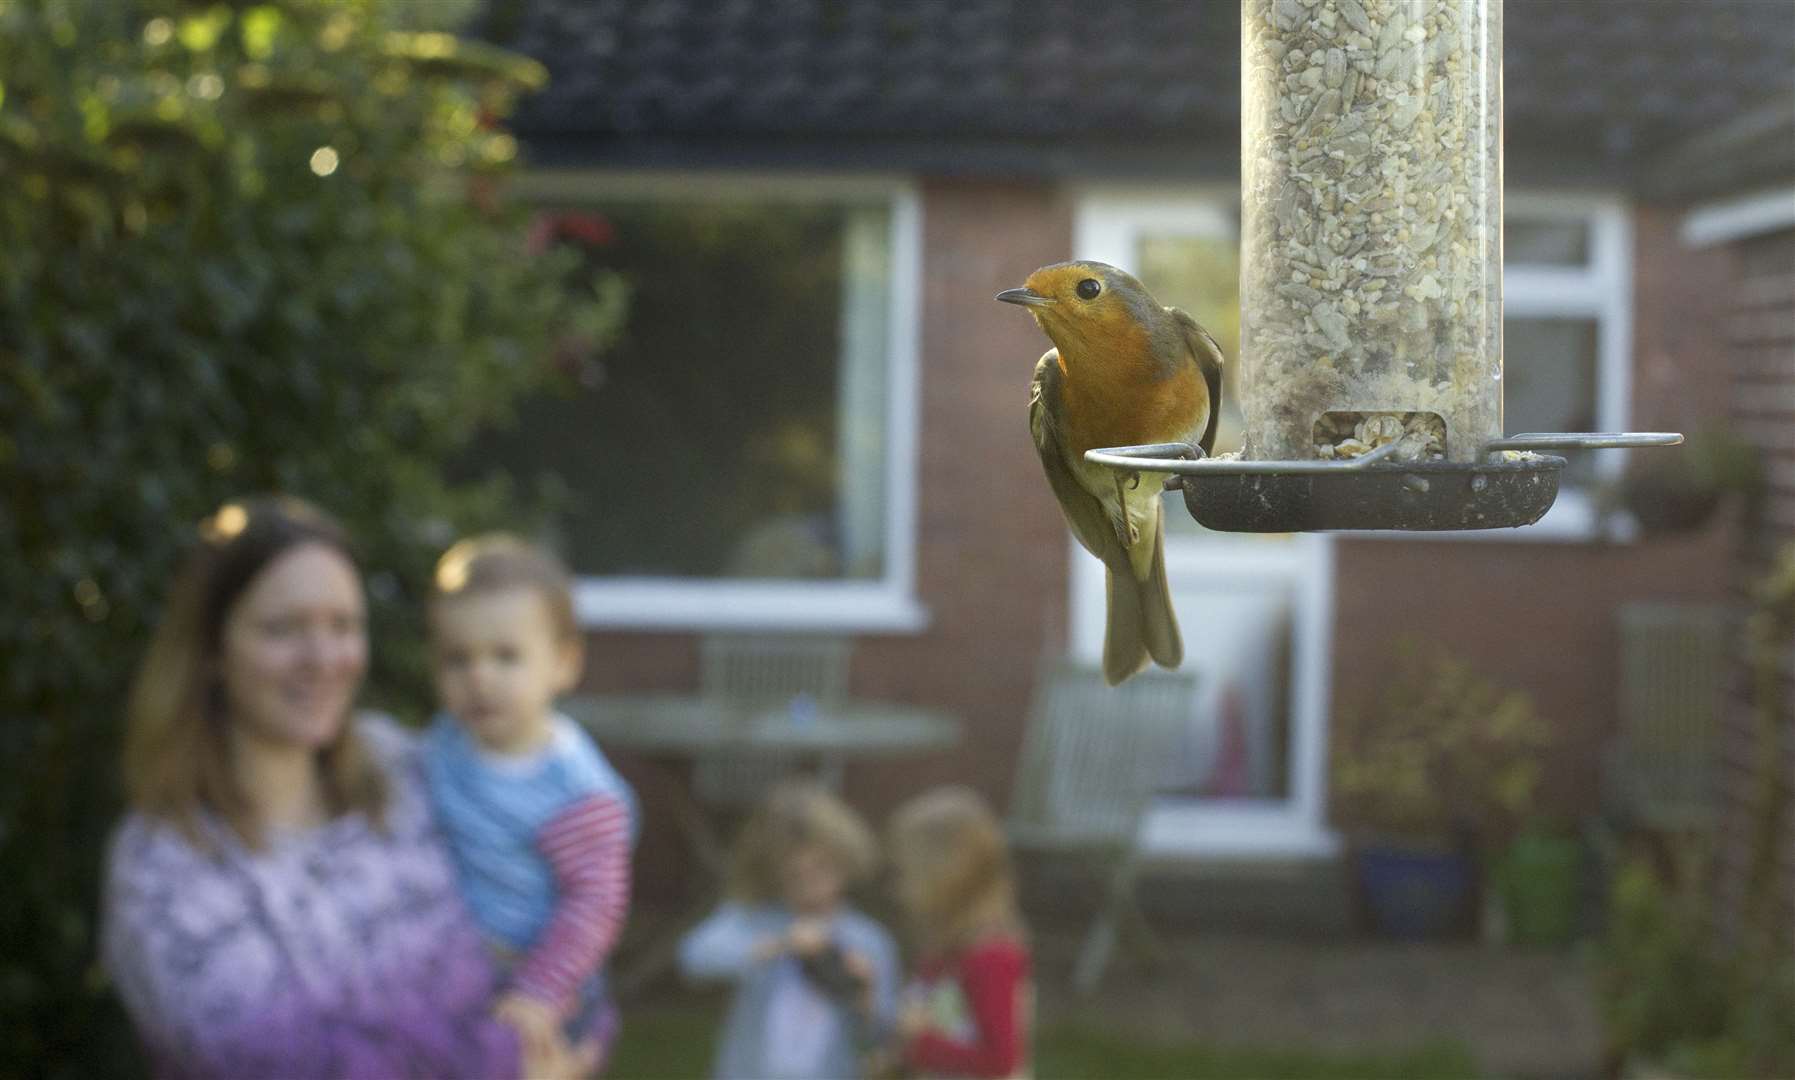 You can spot the birds in your garden to start your day